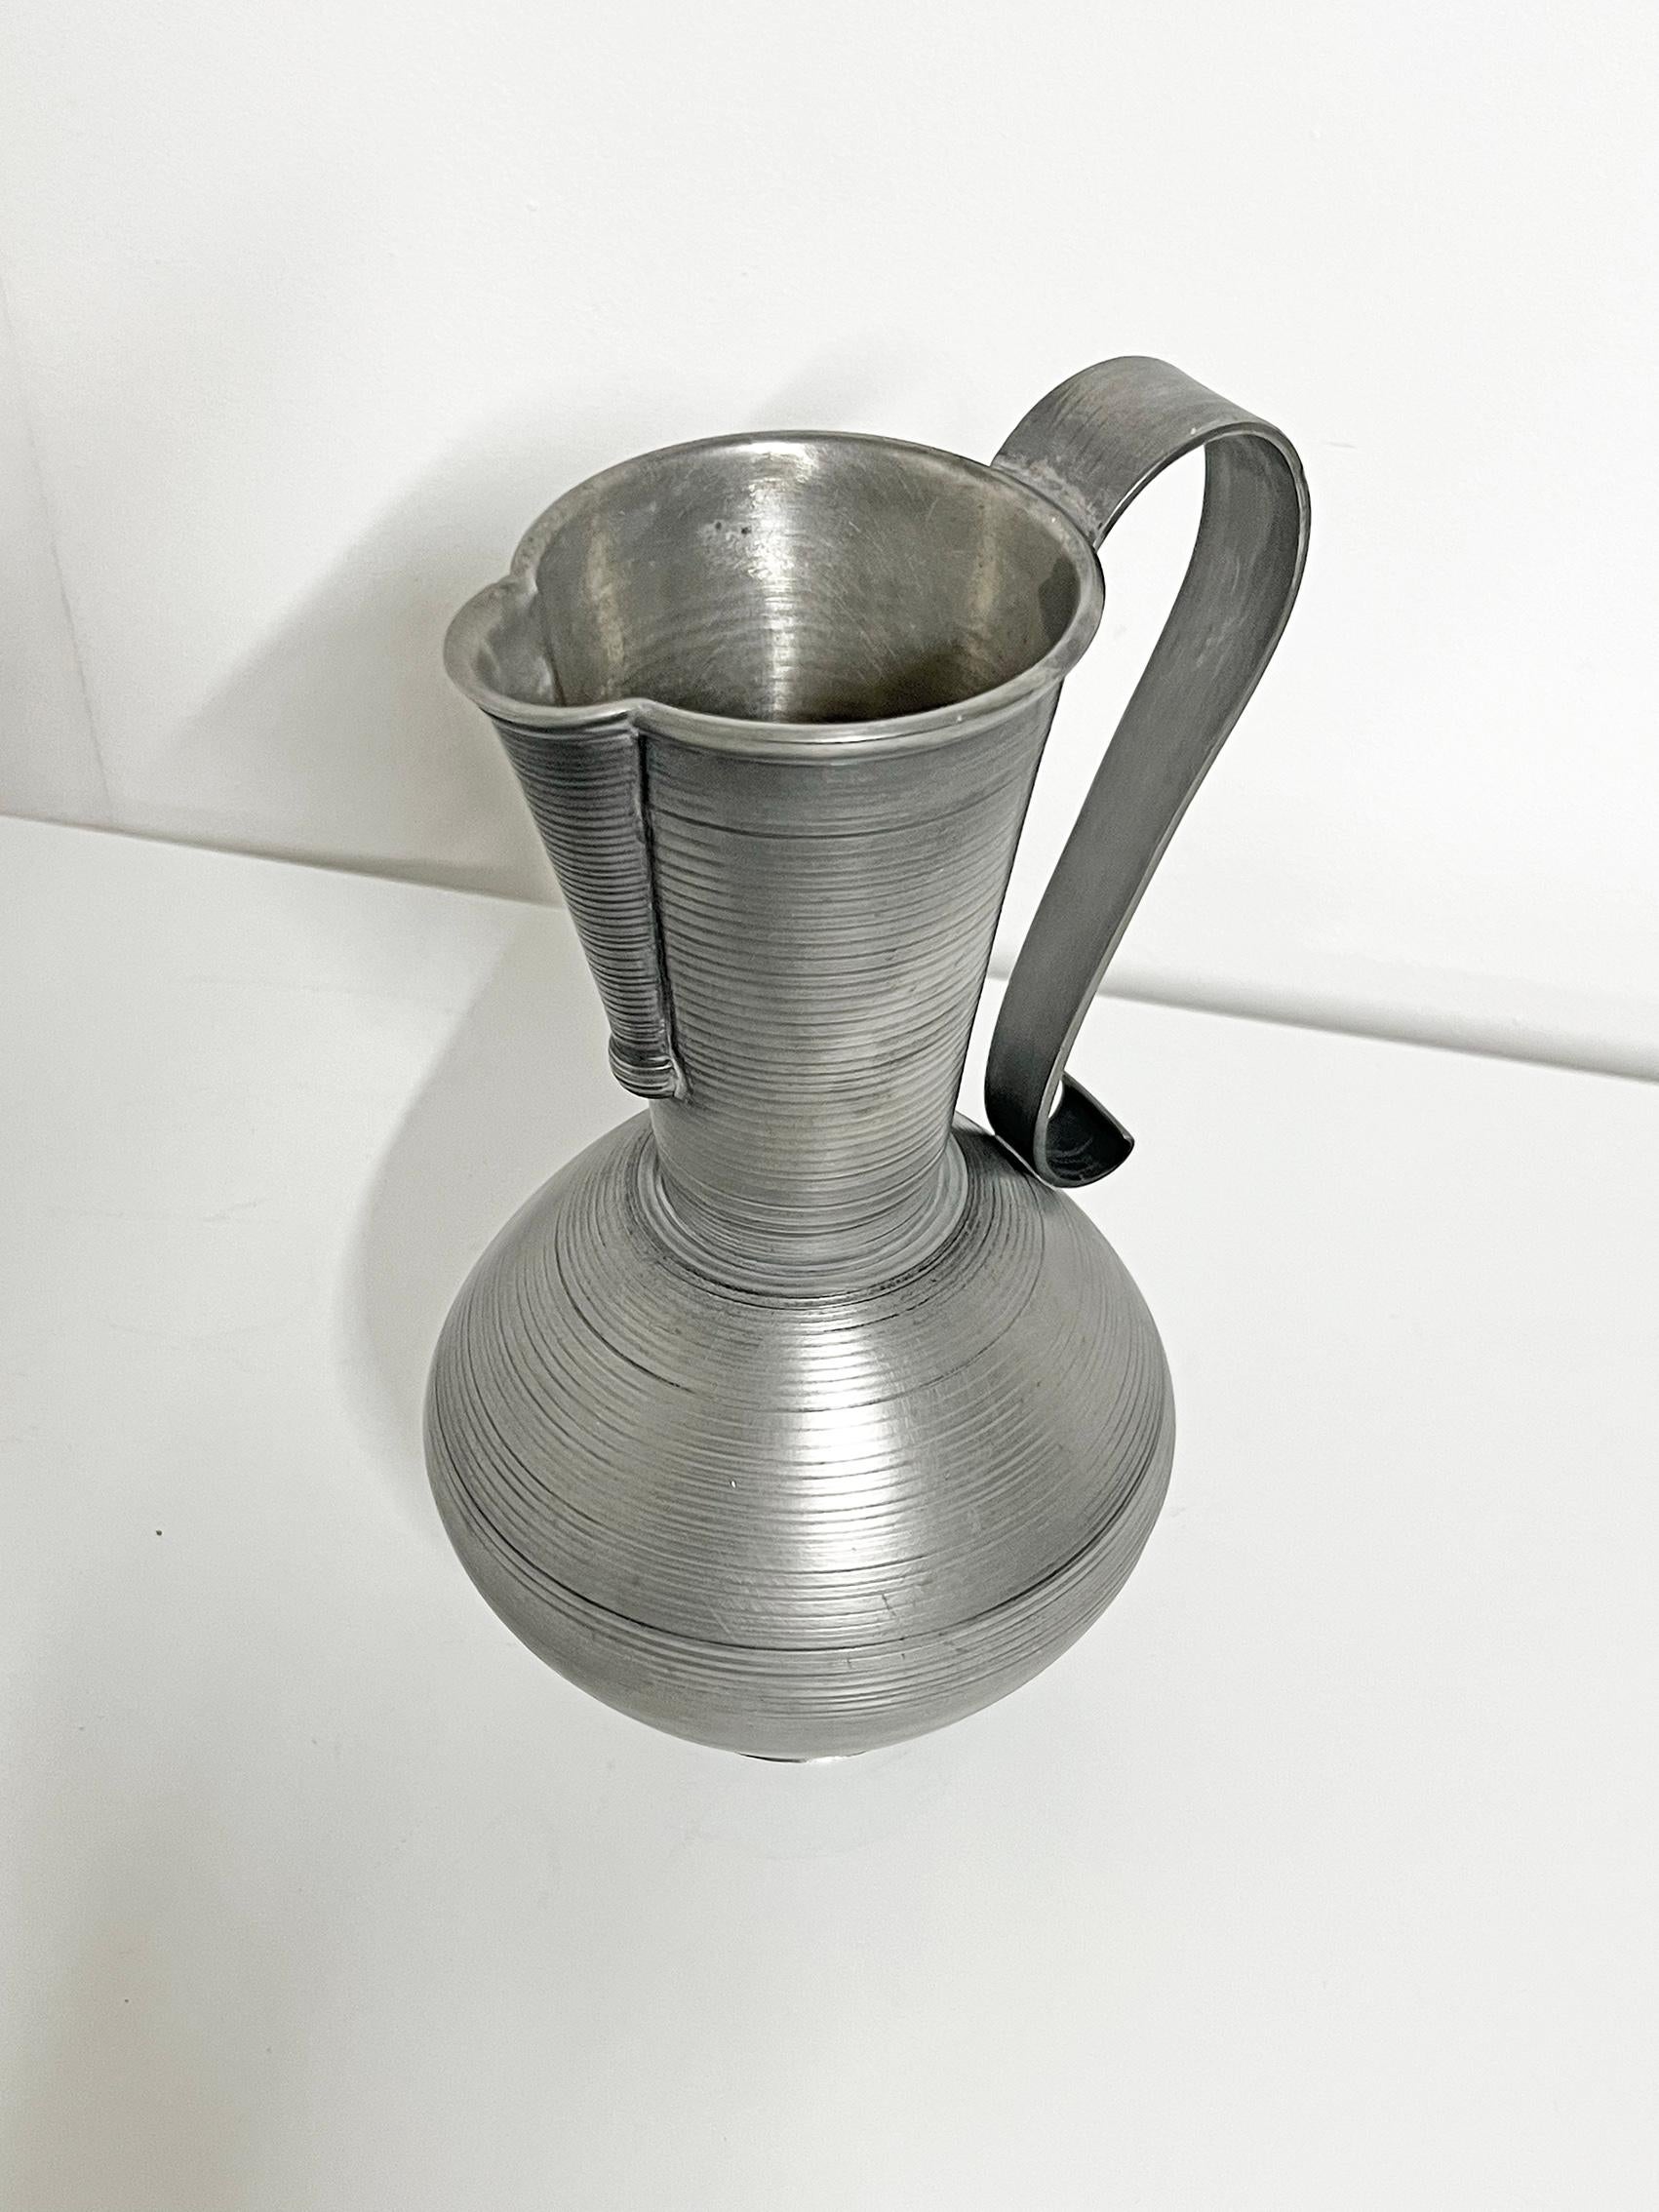 Mid-20th Century Scandinavian Modern Pitcher in Pewter by Gunnar Havstad, Norway, ca 1930-40s For Sale